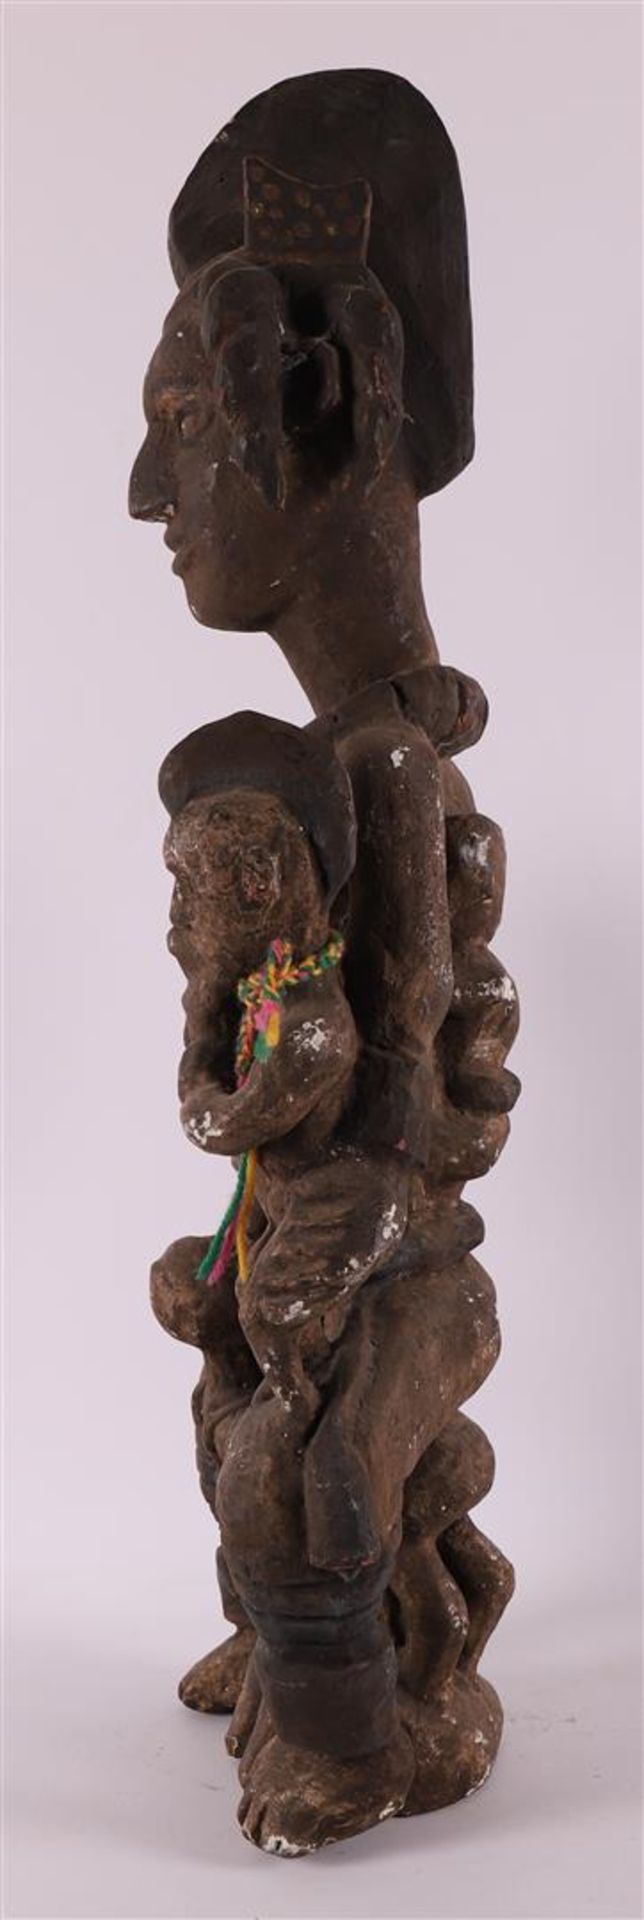 Ethnographic/tribal. A wooden fertility statue, Africa, Yoruba tribe - Image 2 of 4